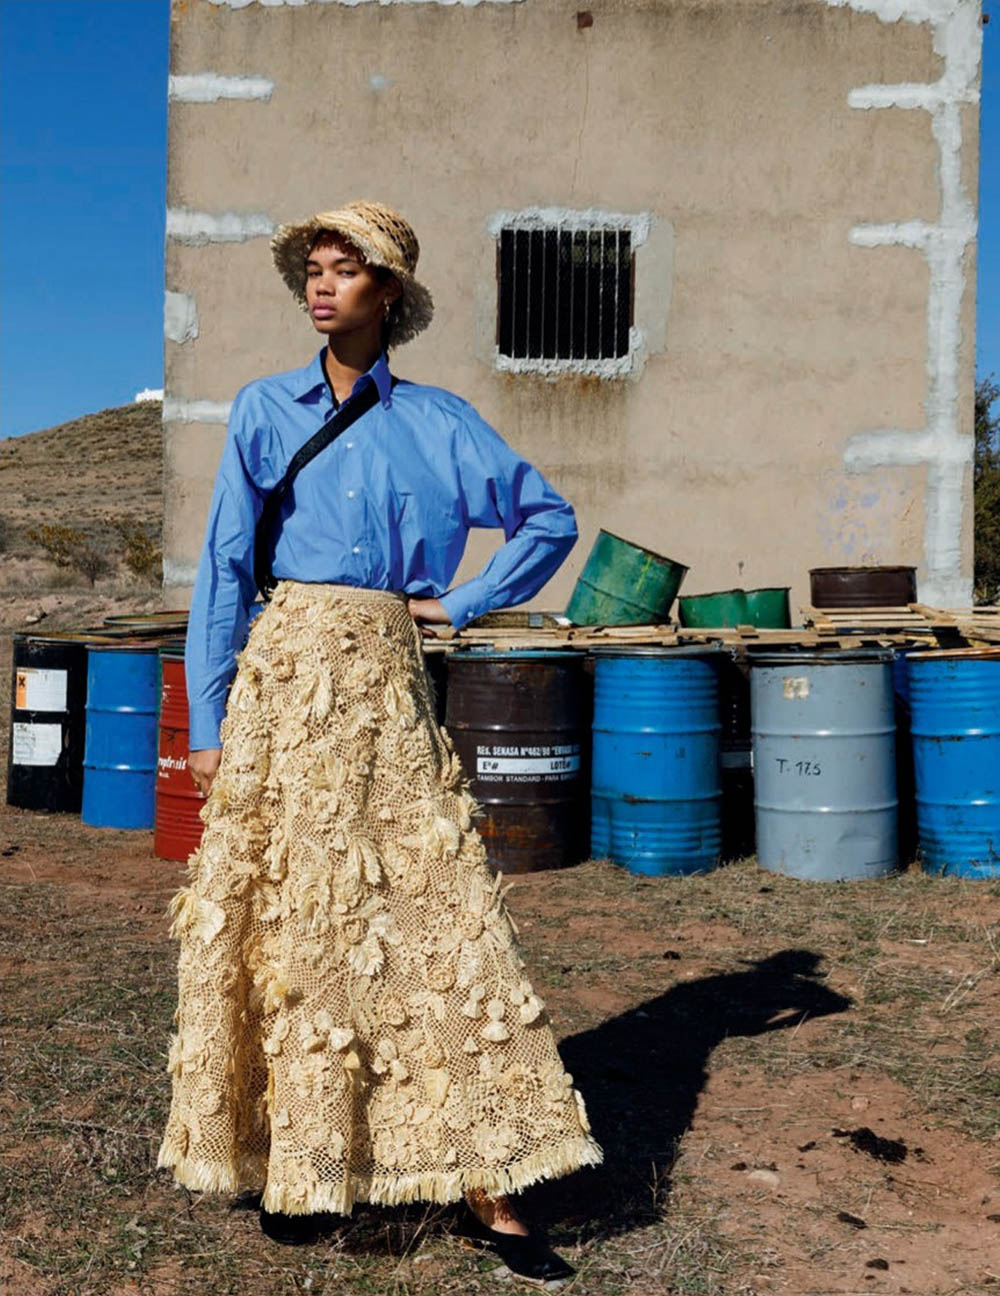 Jordan Daniels and Africa Penalver by Martin Parr for Vogue Spain February 2020